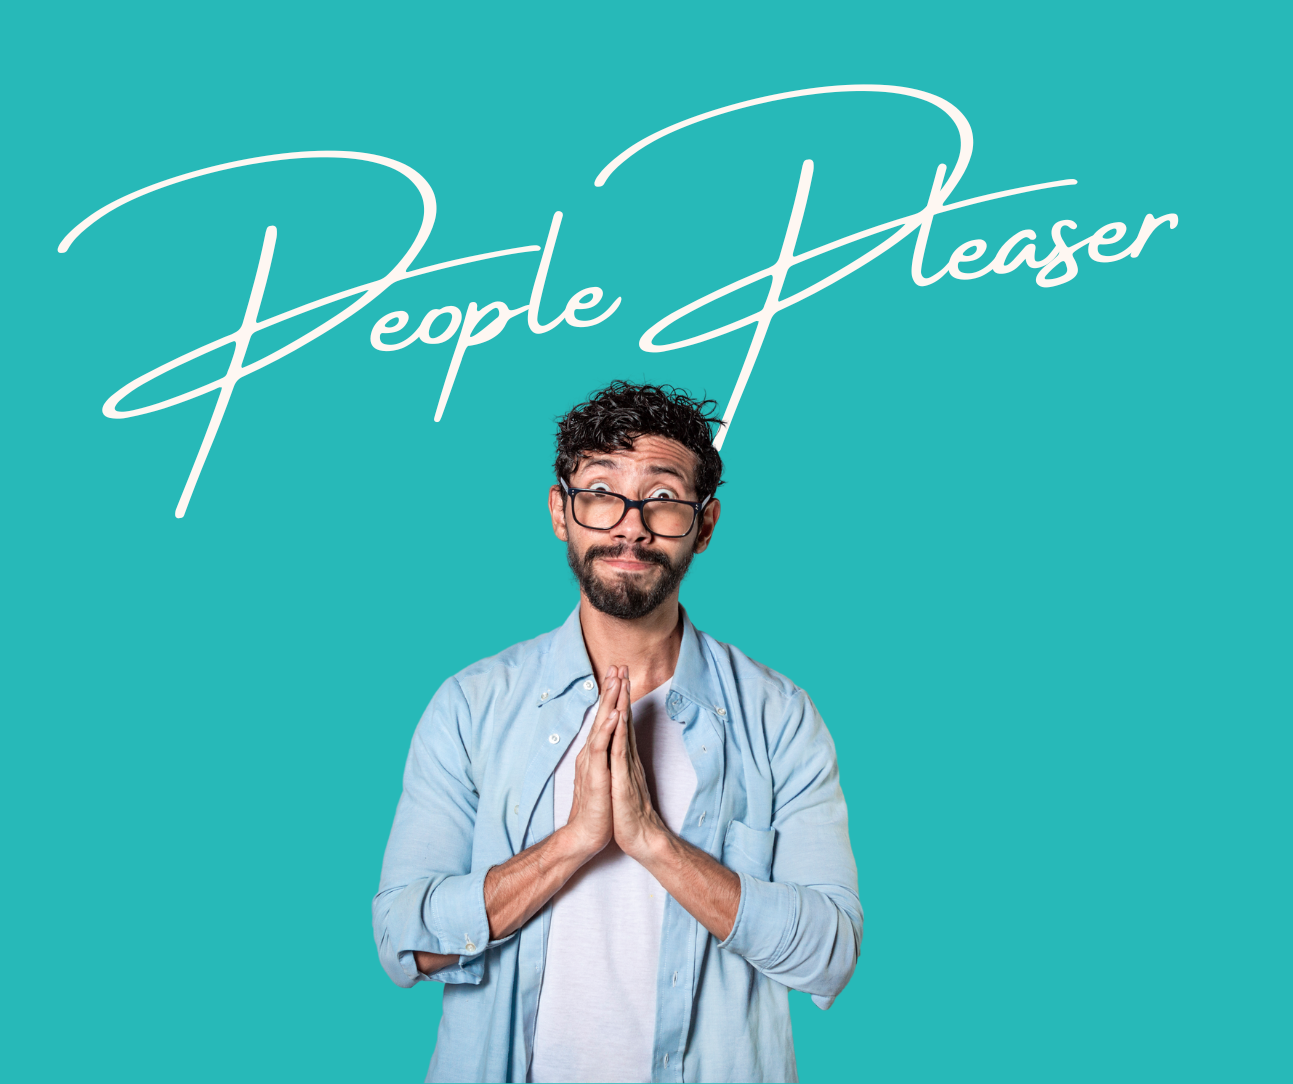 Are You A People Pleaser?